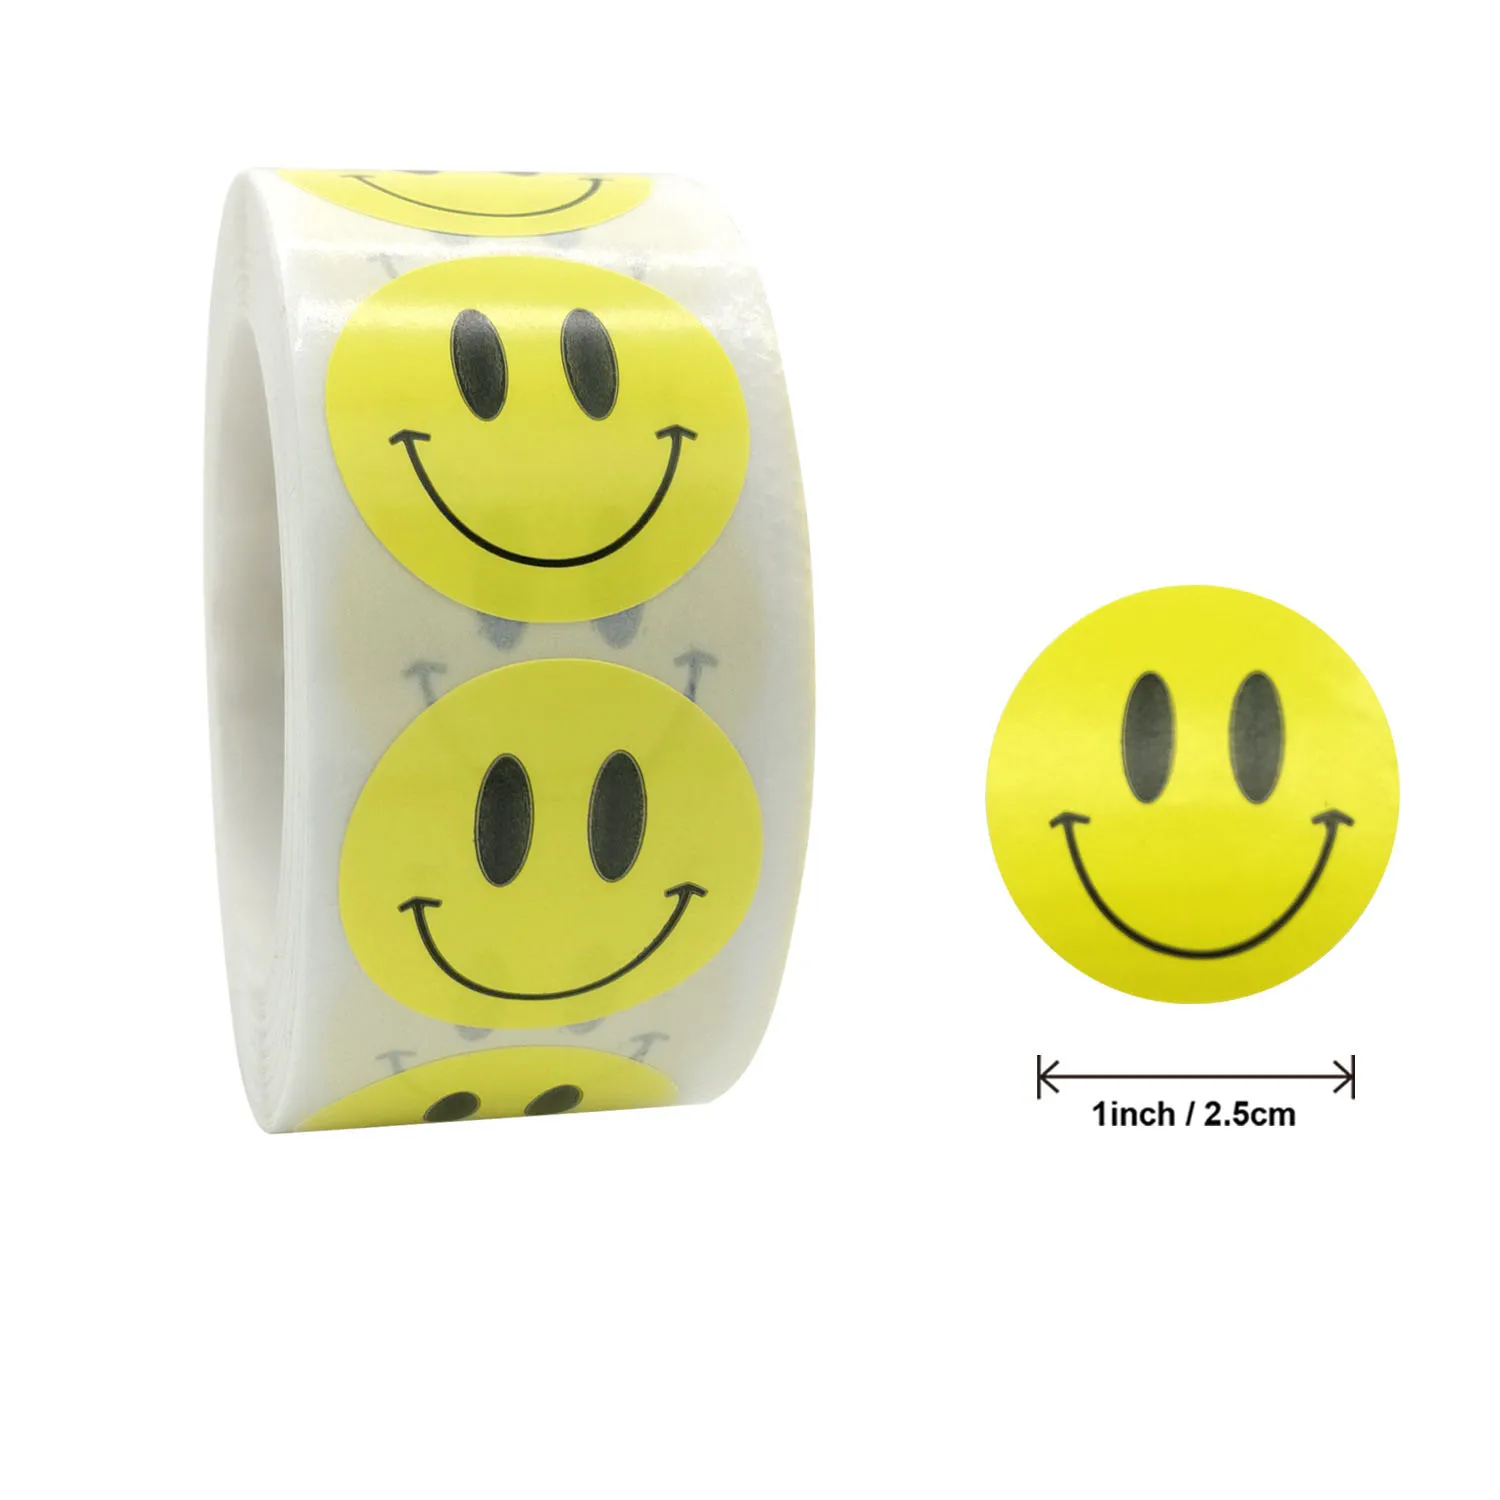 

Qiduo 500Pcs/roll Smiley Face Sticker for Kids Reward Sticker Yellow Dots Labels Happy Smile Face Stationery Sticker Kids Toys